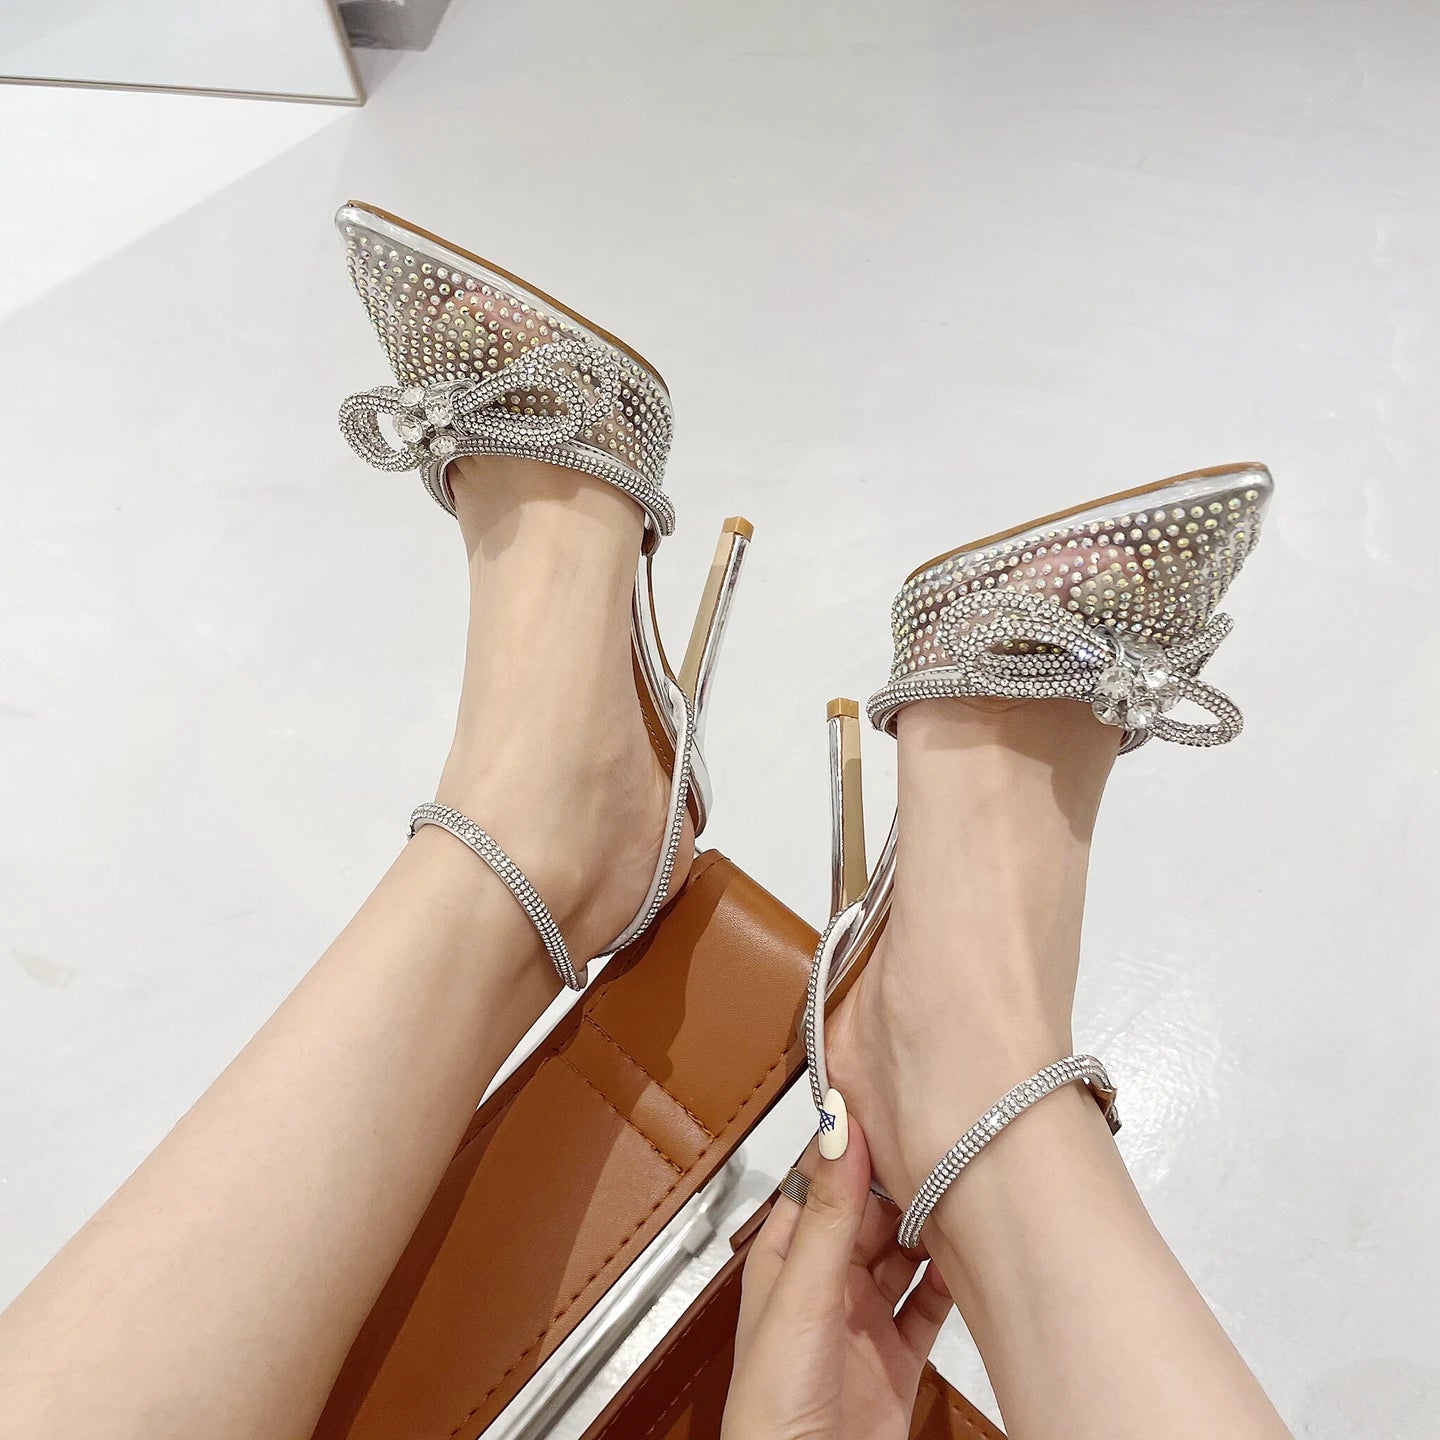 PVC Transparent Silver CRYSTAL Women Pumps Fashion Ankle Strap Bridal Thin High Heels Spring Autumn Wedding Party Shoes